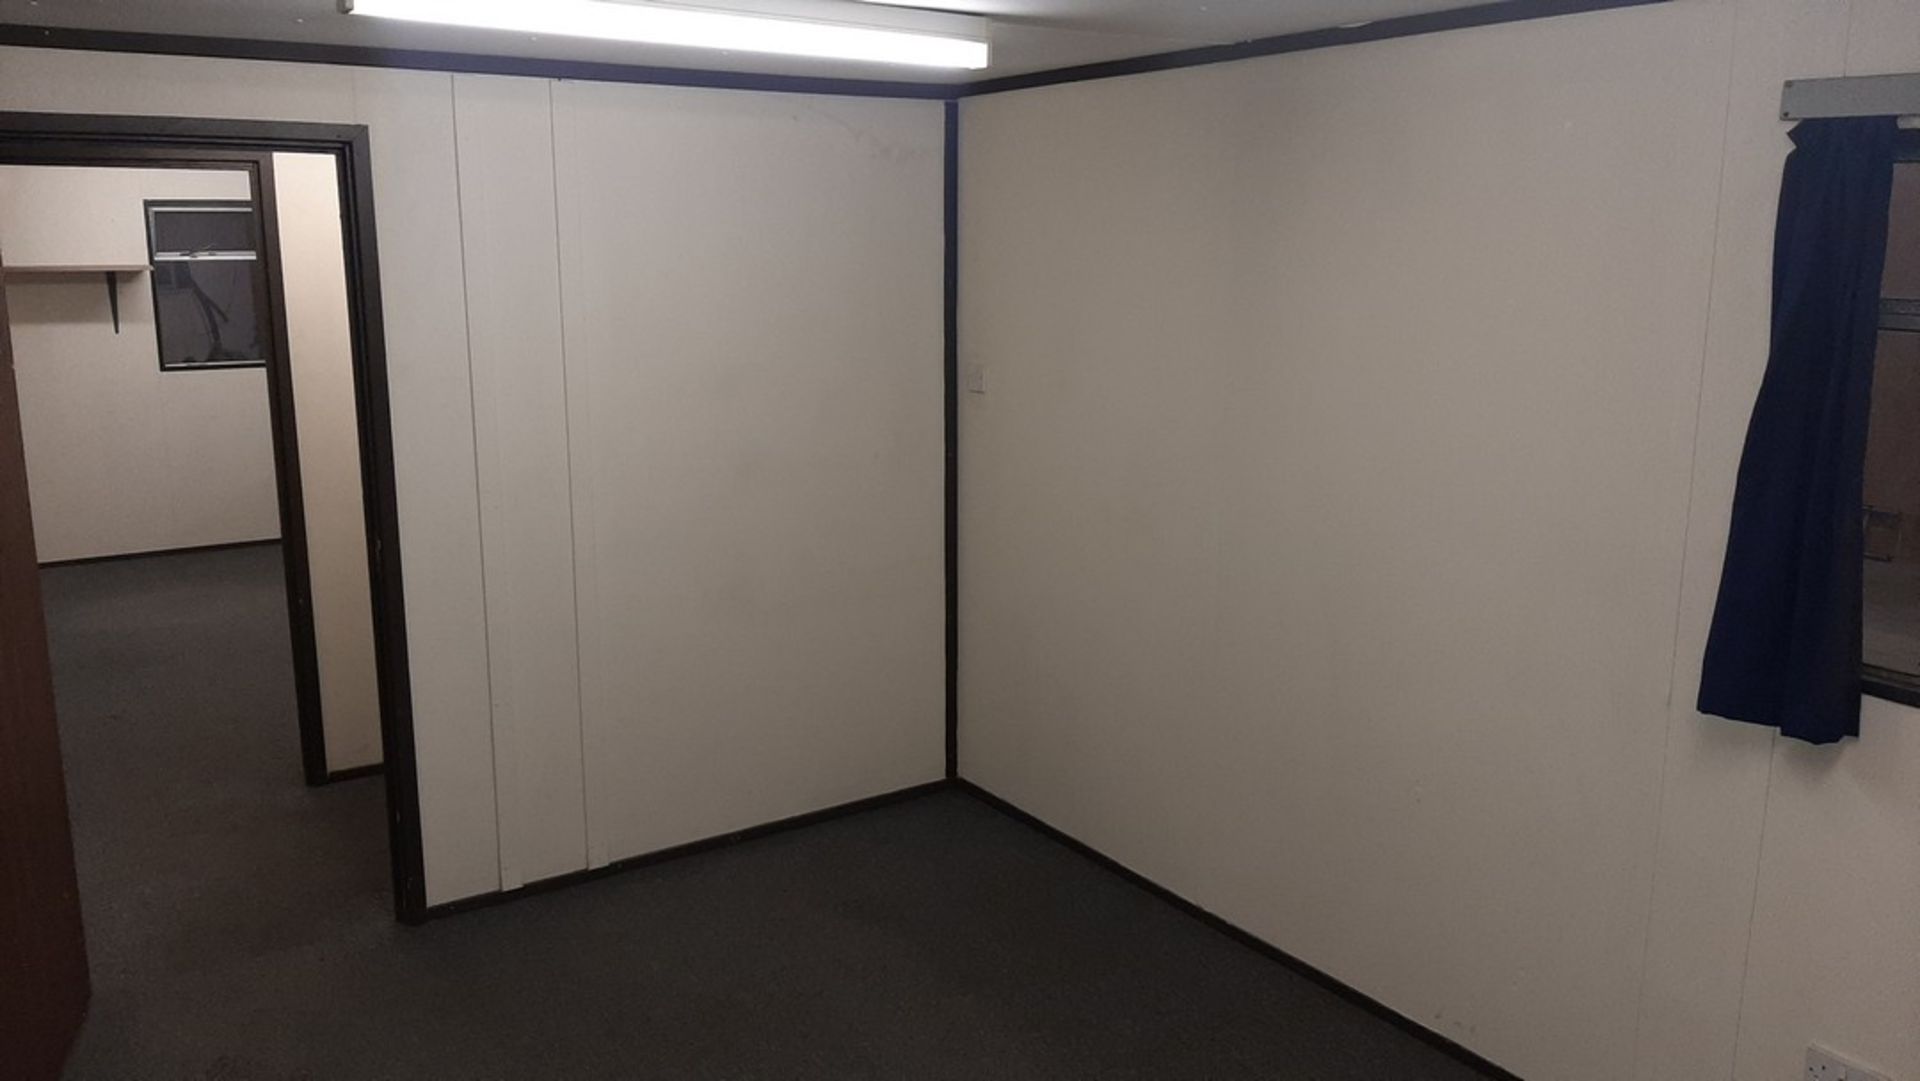 10ft x 32ft jack leg cabin. With two 10ftx 14ft rooms and hall. Used as office inside building. - Image 21 of 25